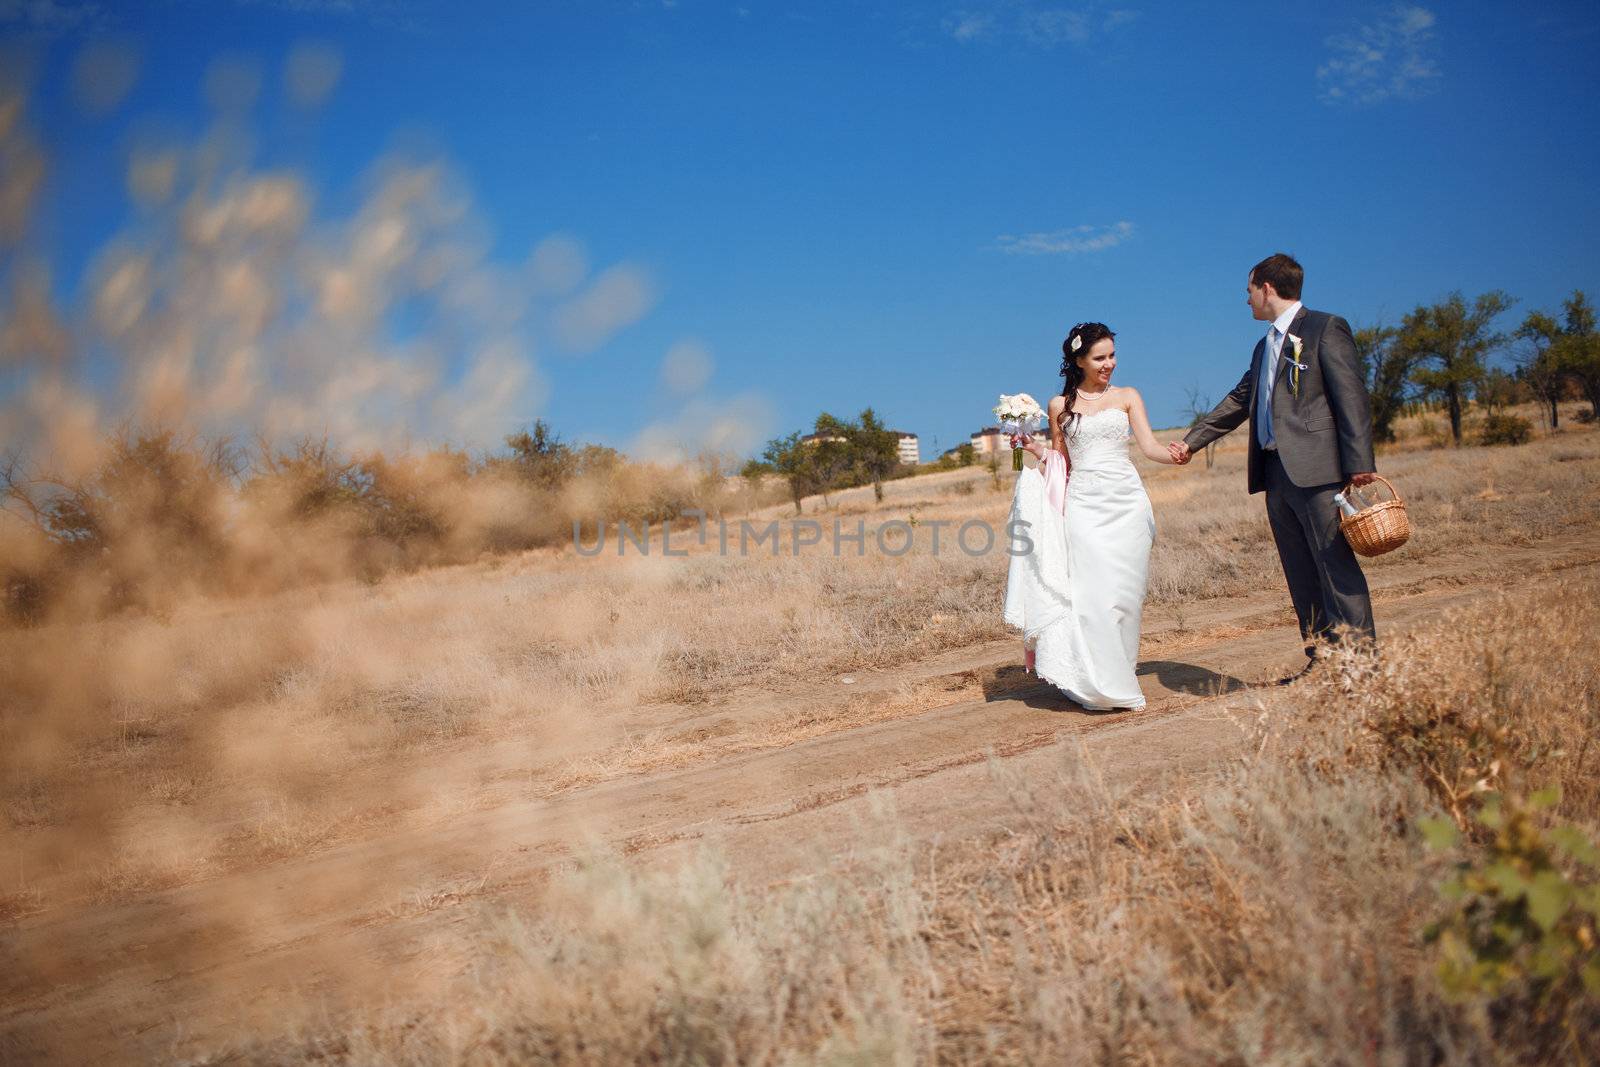 bride and groom walking on the road